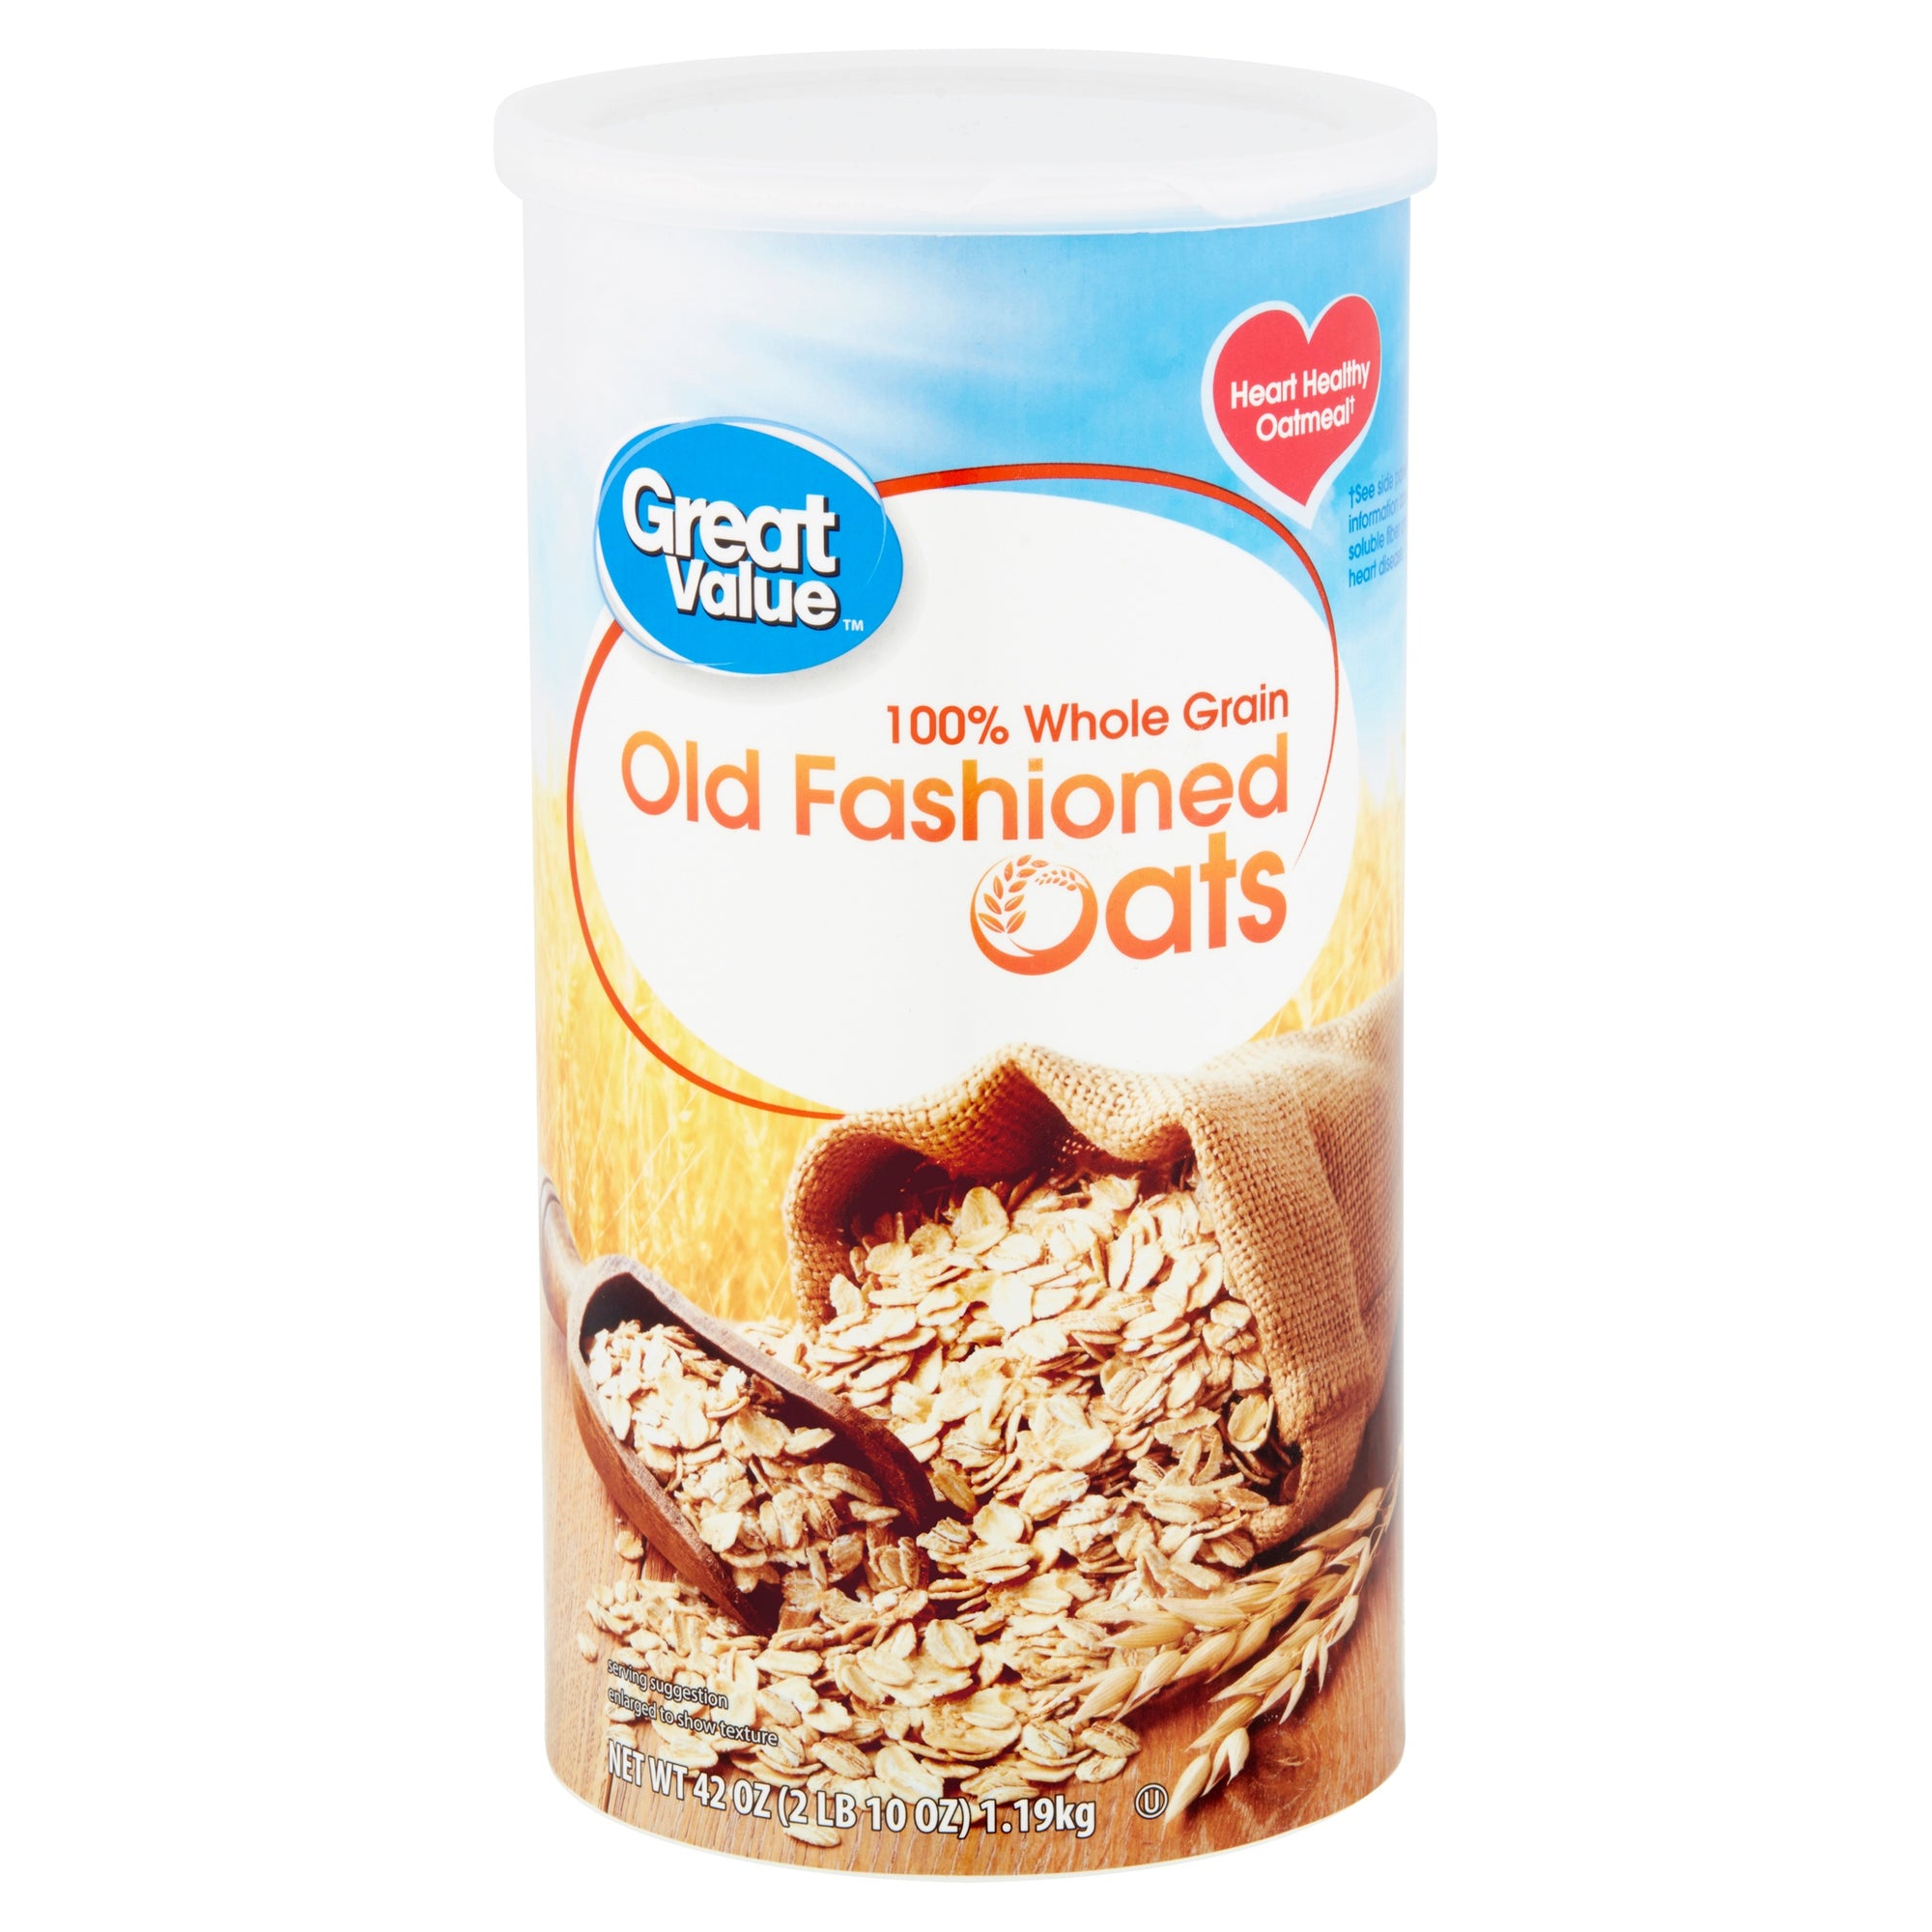 Great Value 100% Whole Grain Old Fashioned Oats